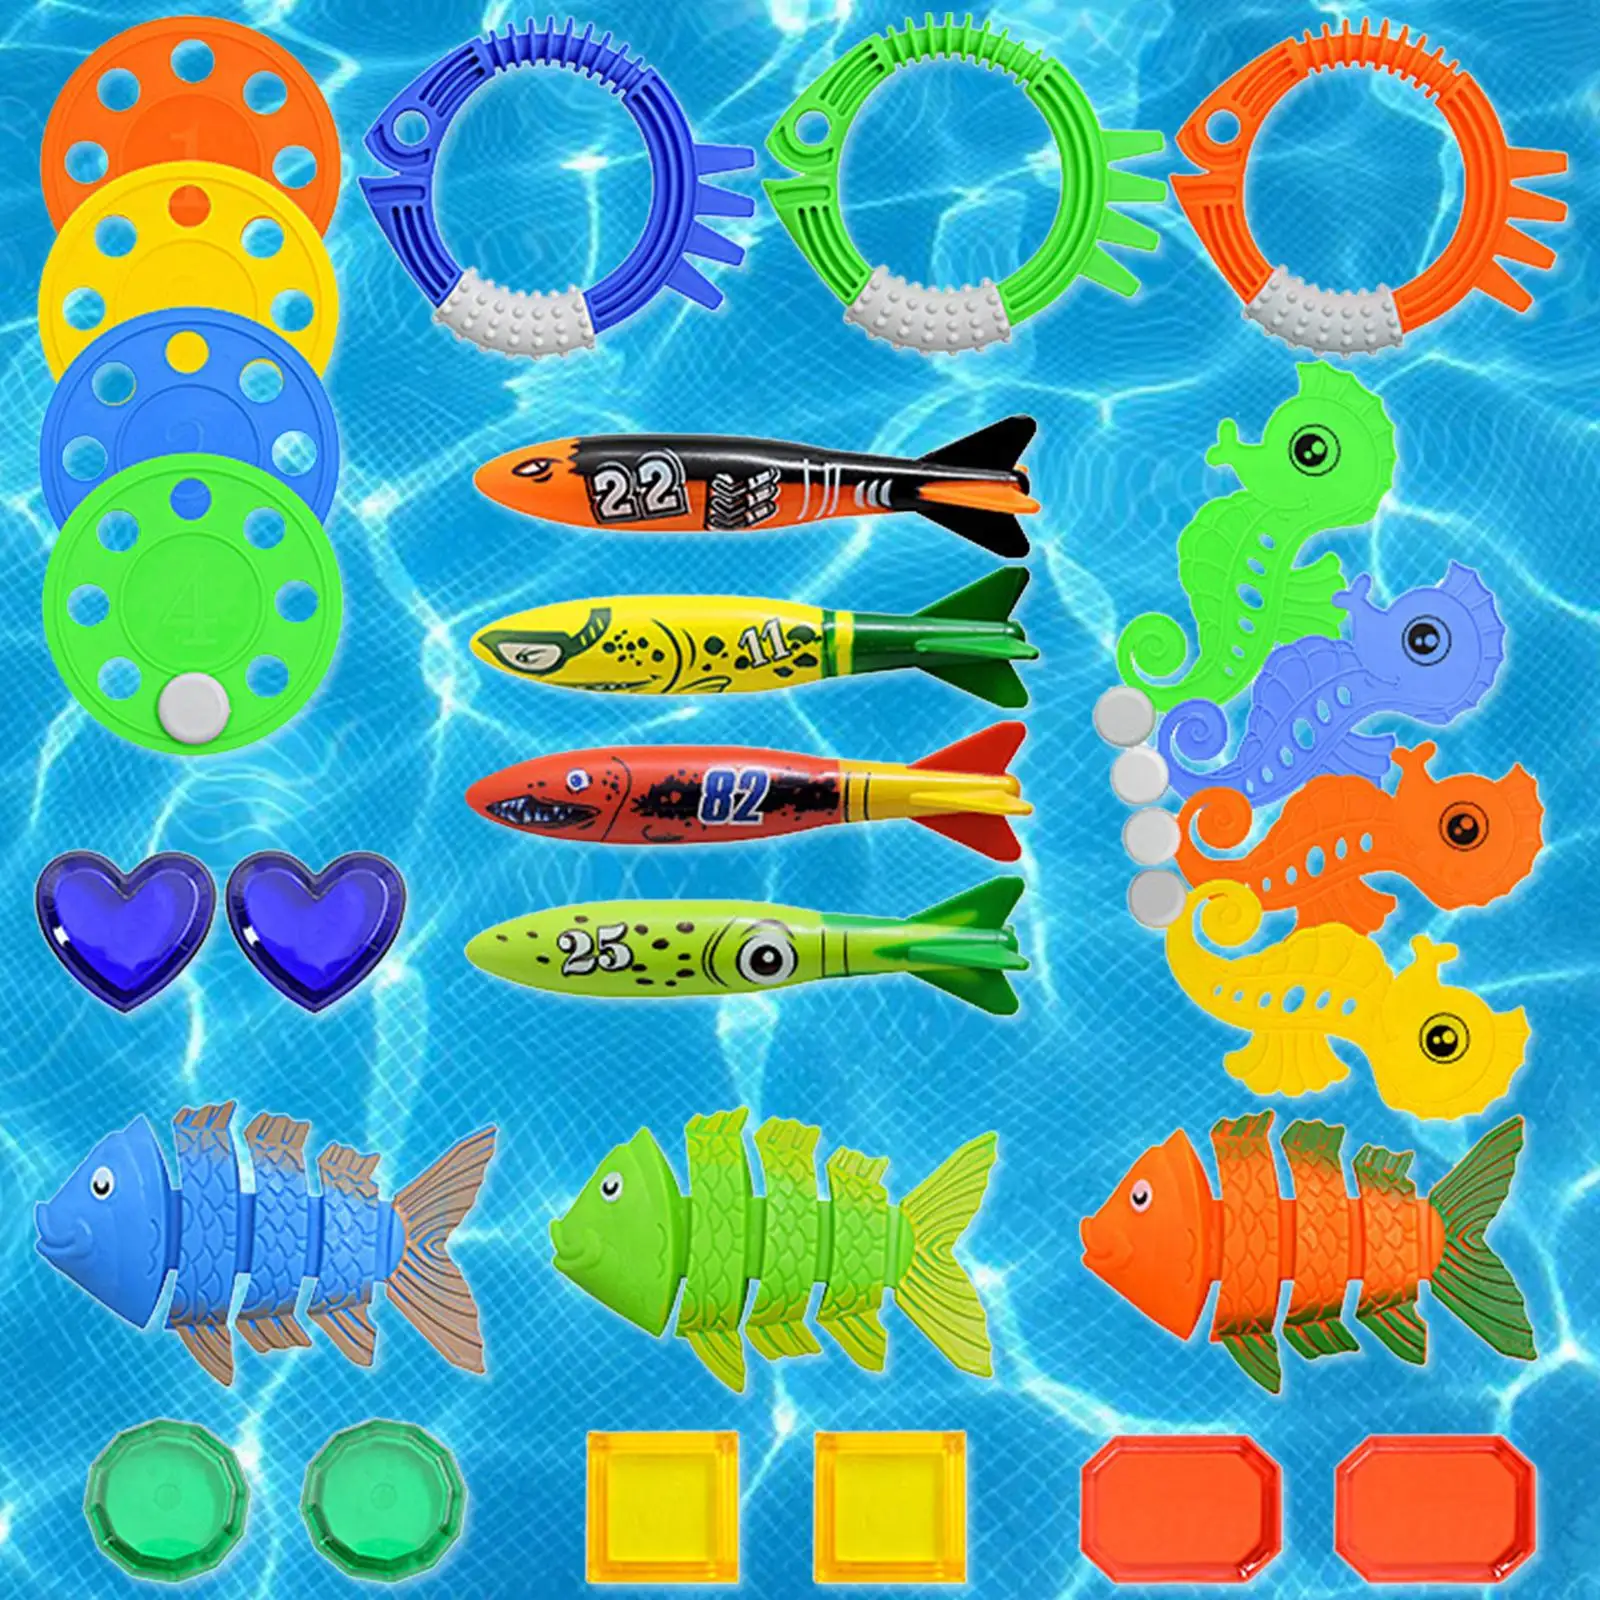 Funny Diving Pool Toys Included Sparkling Gems Swimming Pool Toys for Kids